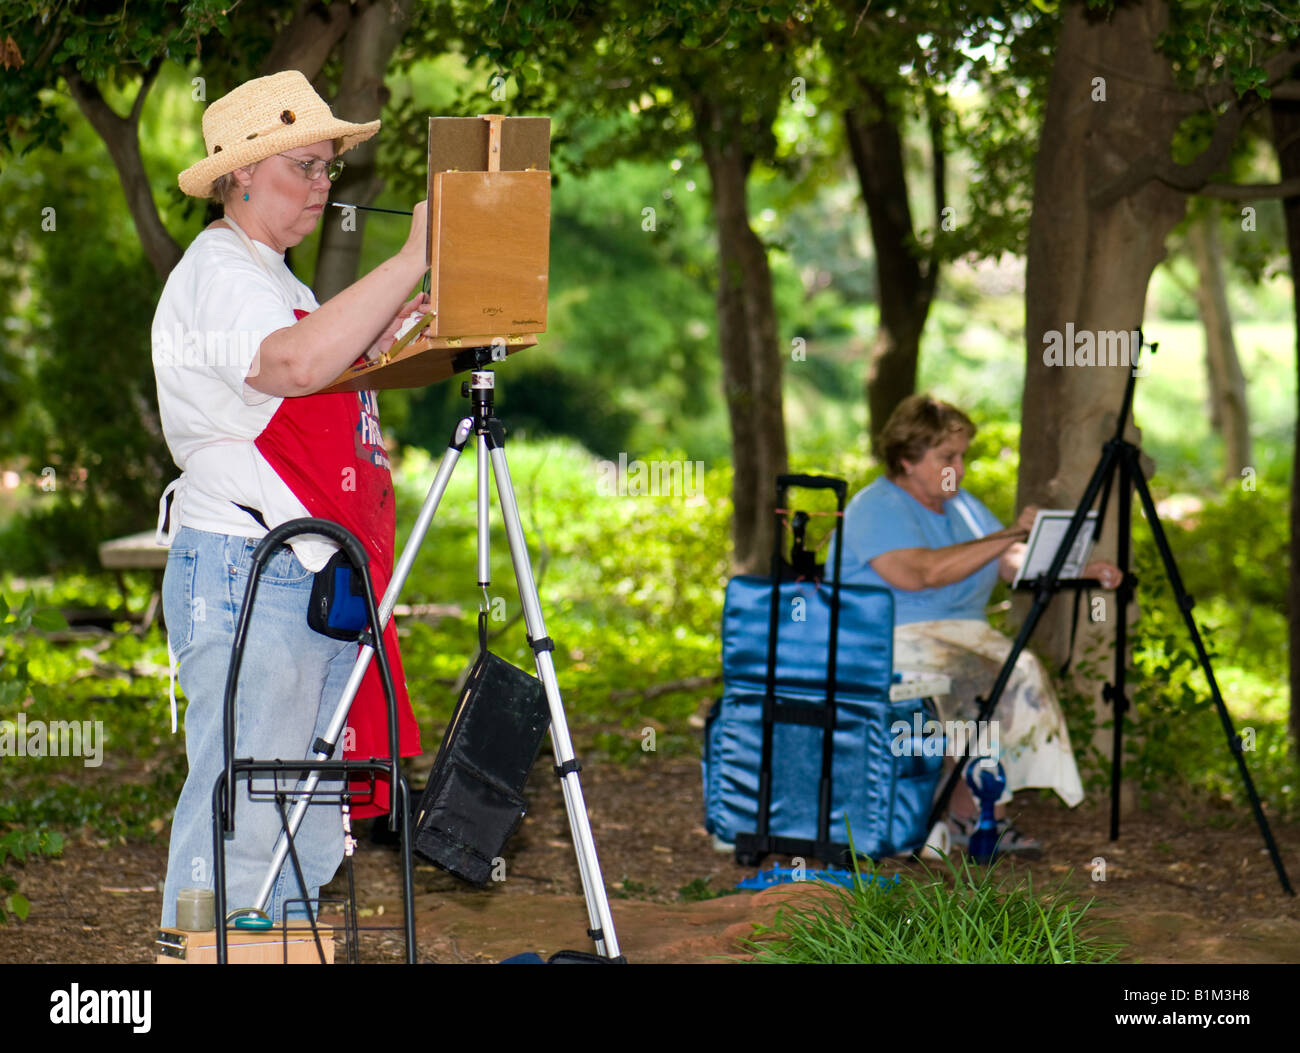 Two women aged 50-65 participate in a painting workshop at a park in Oklahoma City, Oklahoma, USA. Stock Photo